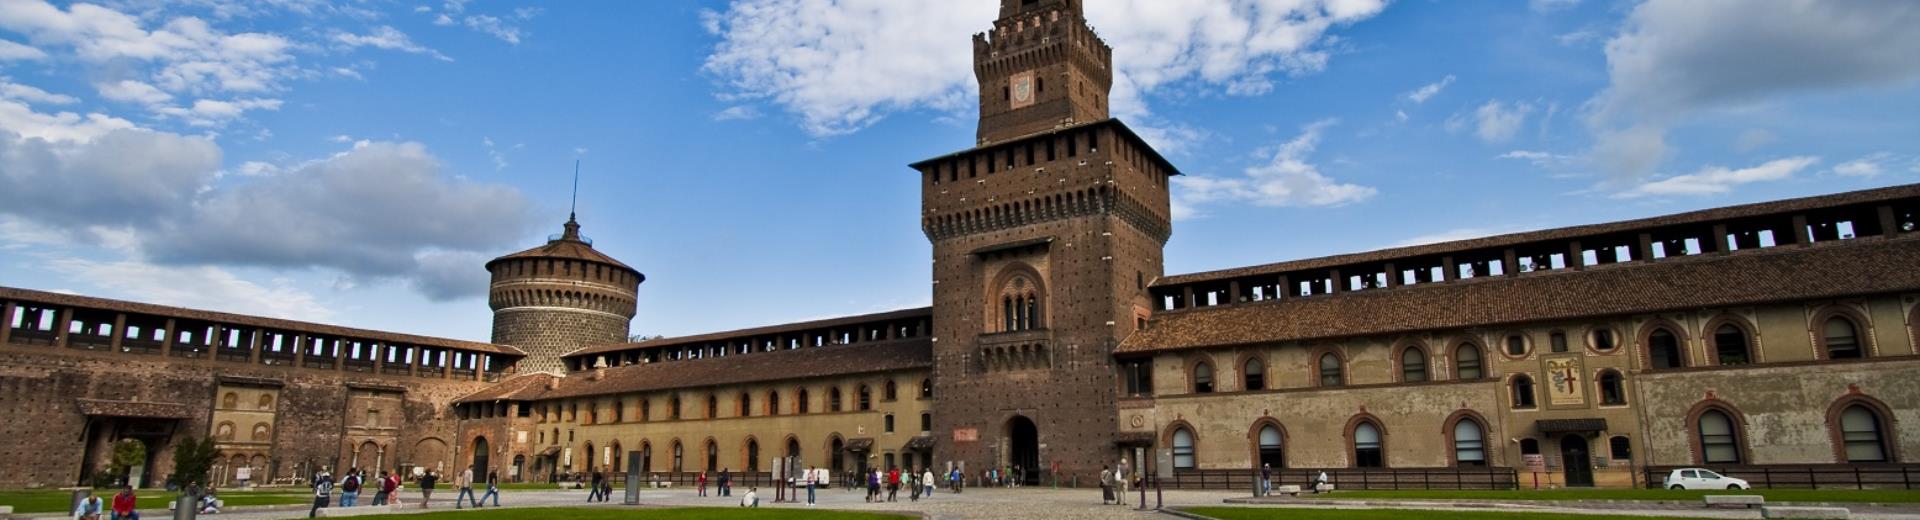 Discover Milan and its beauties: the Castello Sforzesco easy to reach from Hotel Astoria